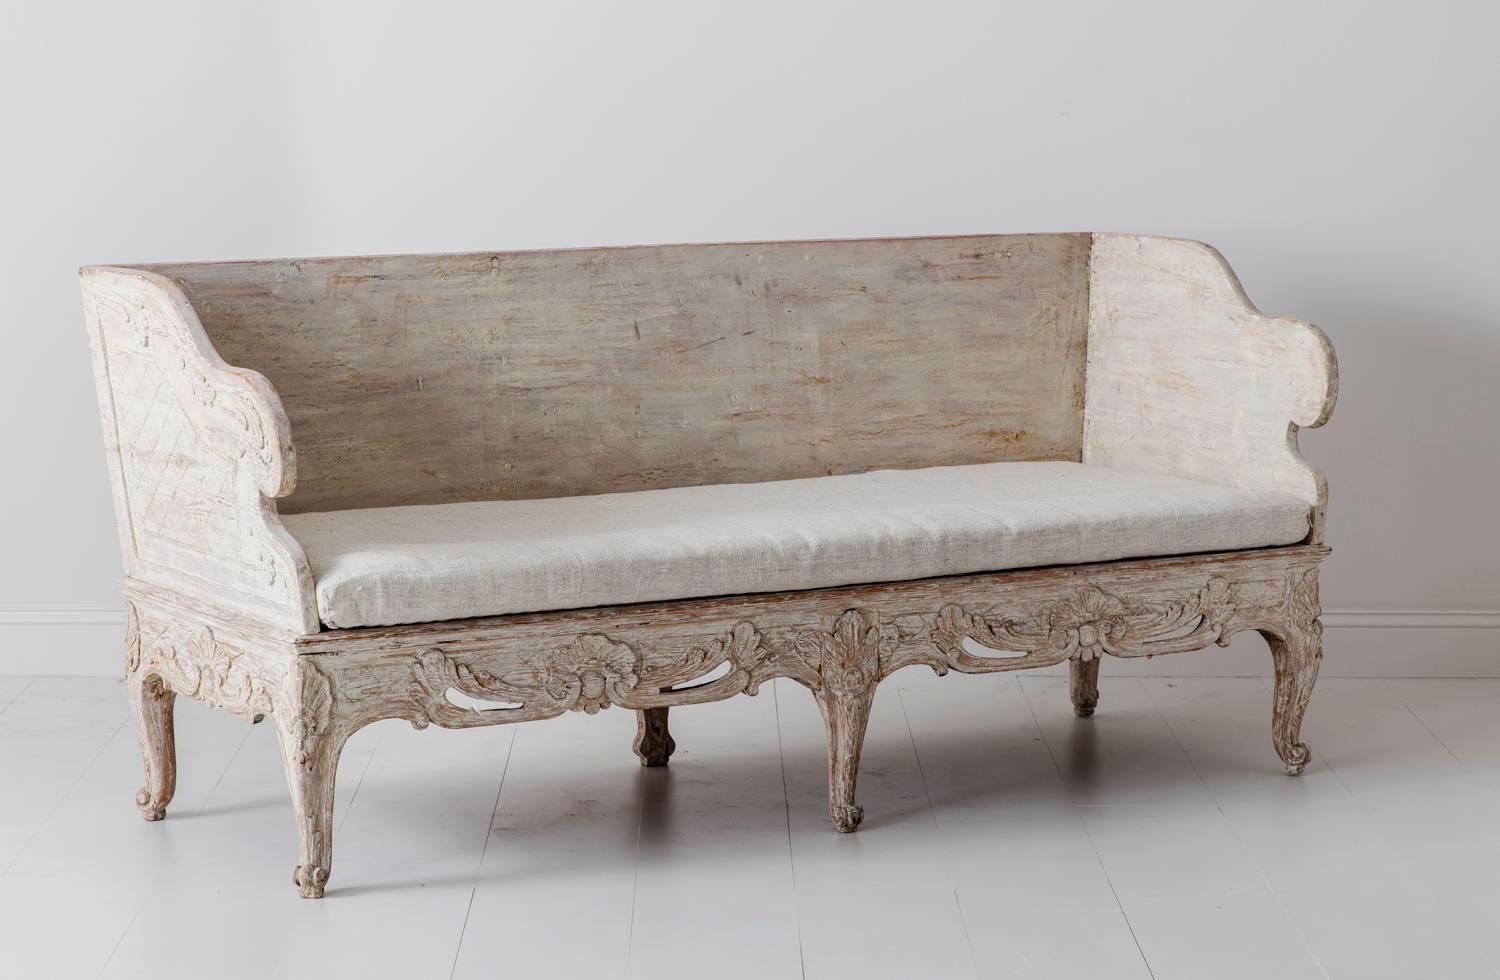 Wood 18th Century Swedish Rococo Period Trag Sofa Bench in Original Paint For Sale